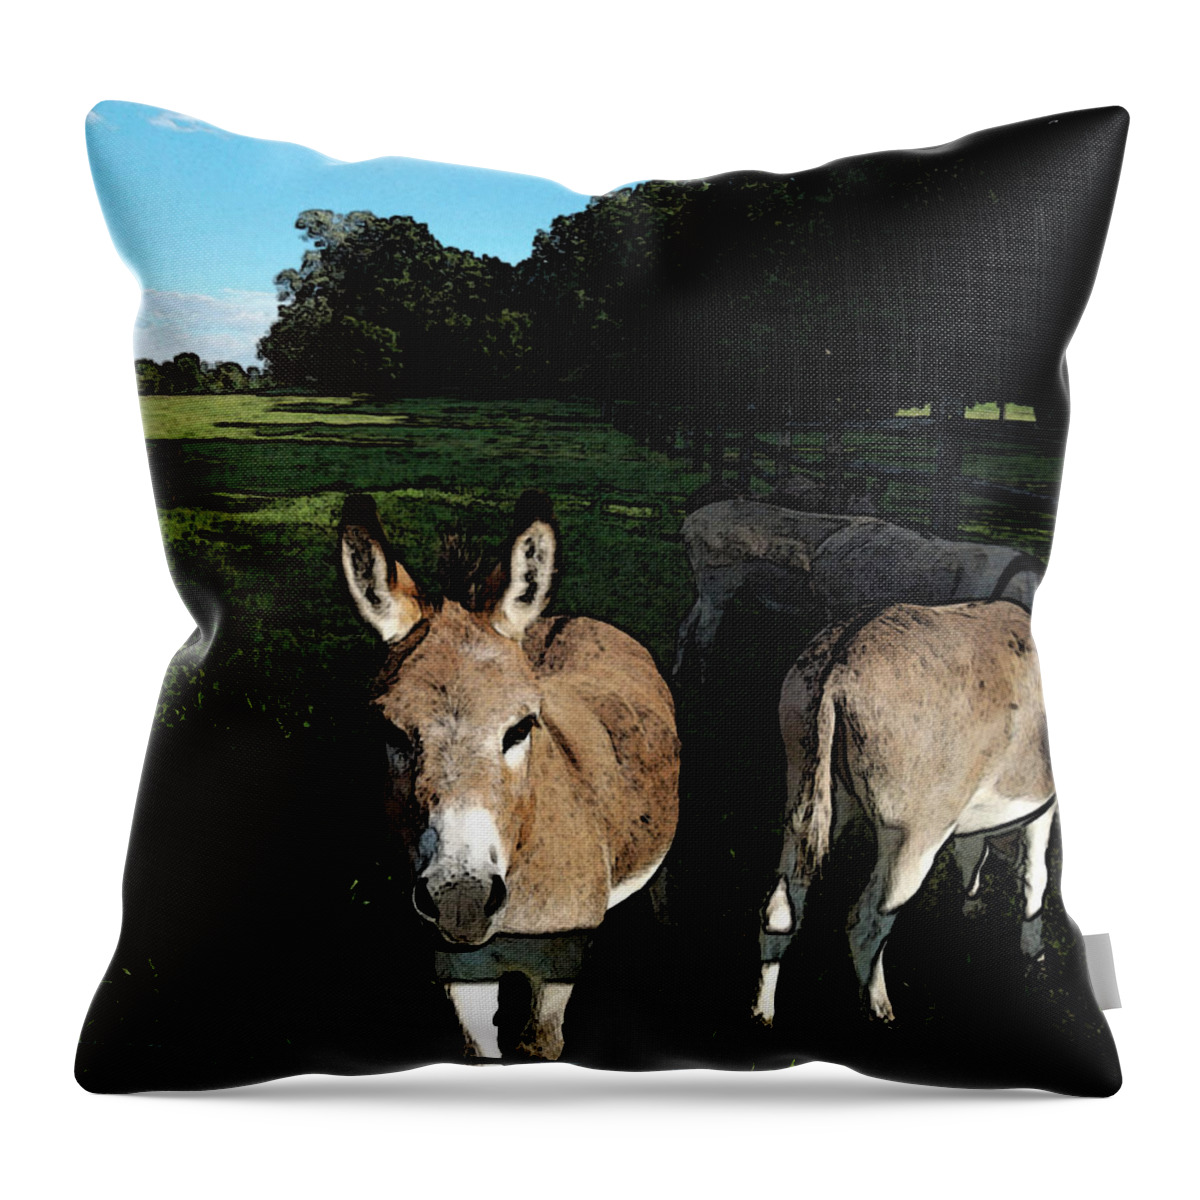 Donkeys Throw Pillow featuring the photograph Hey There by Susan Esbensen